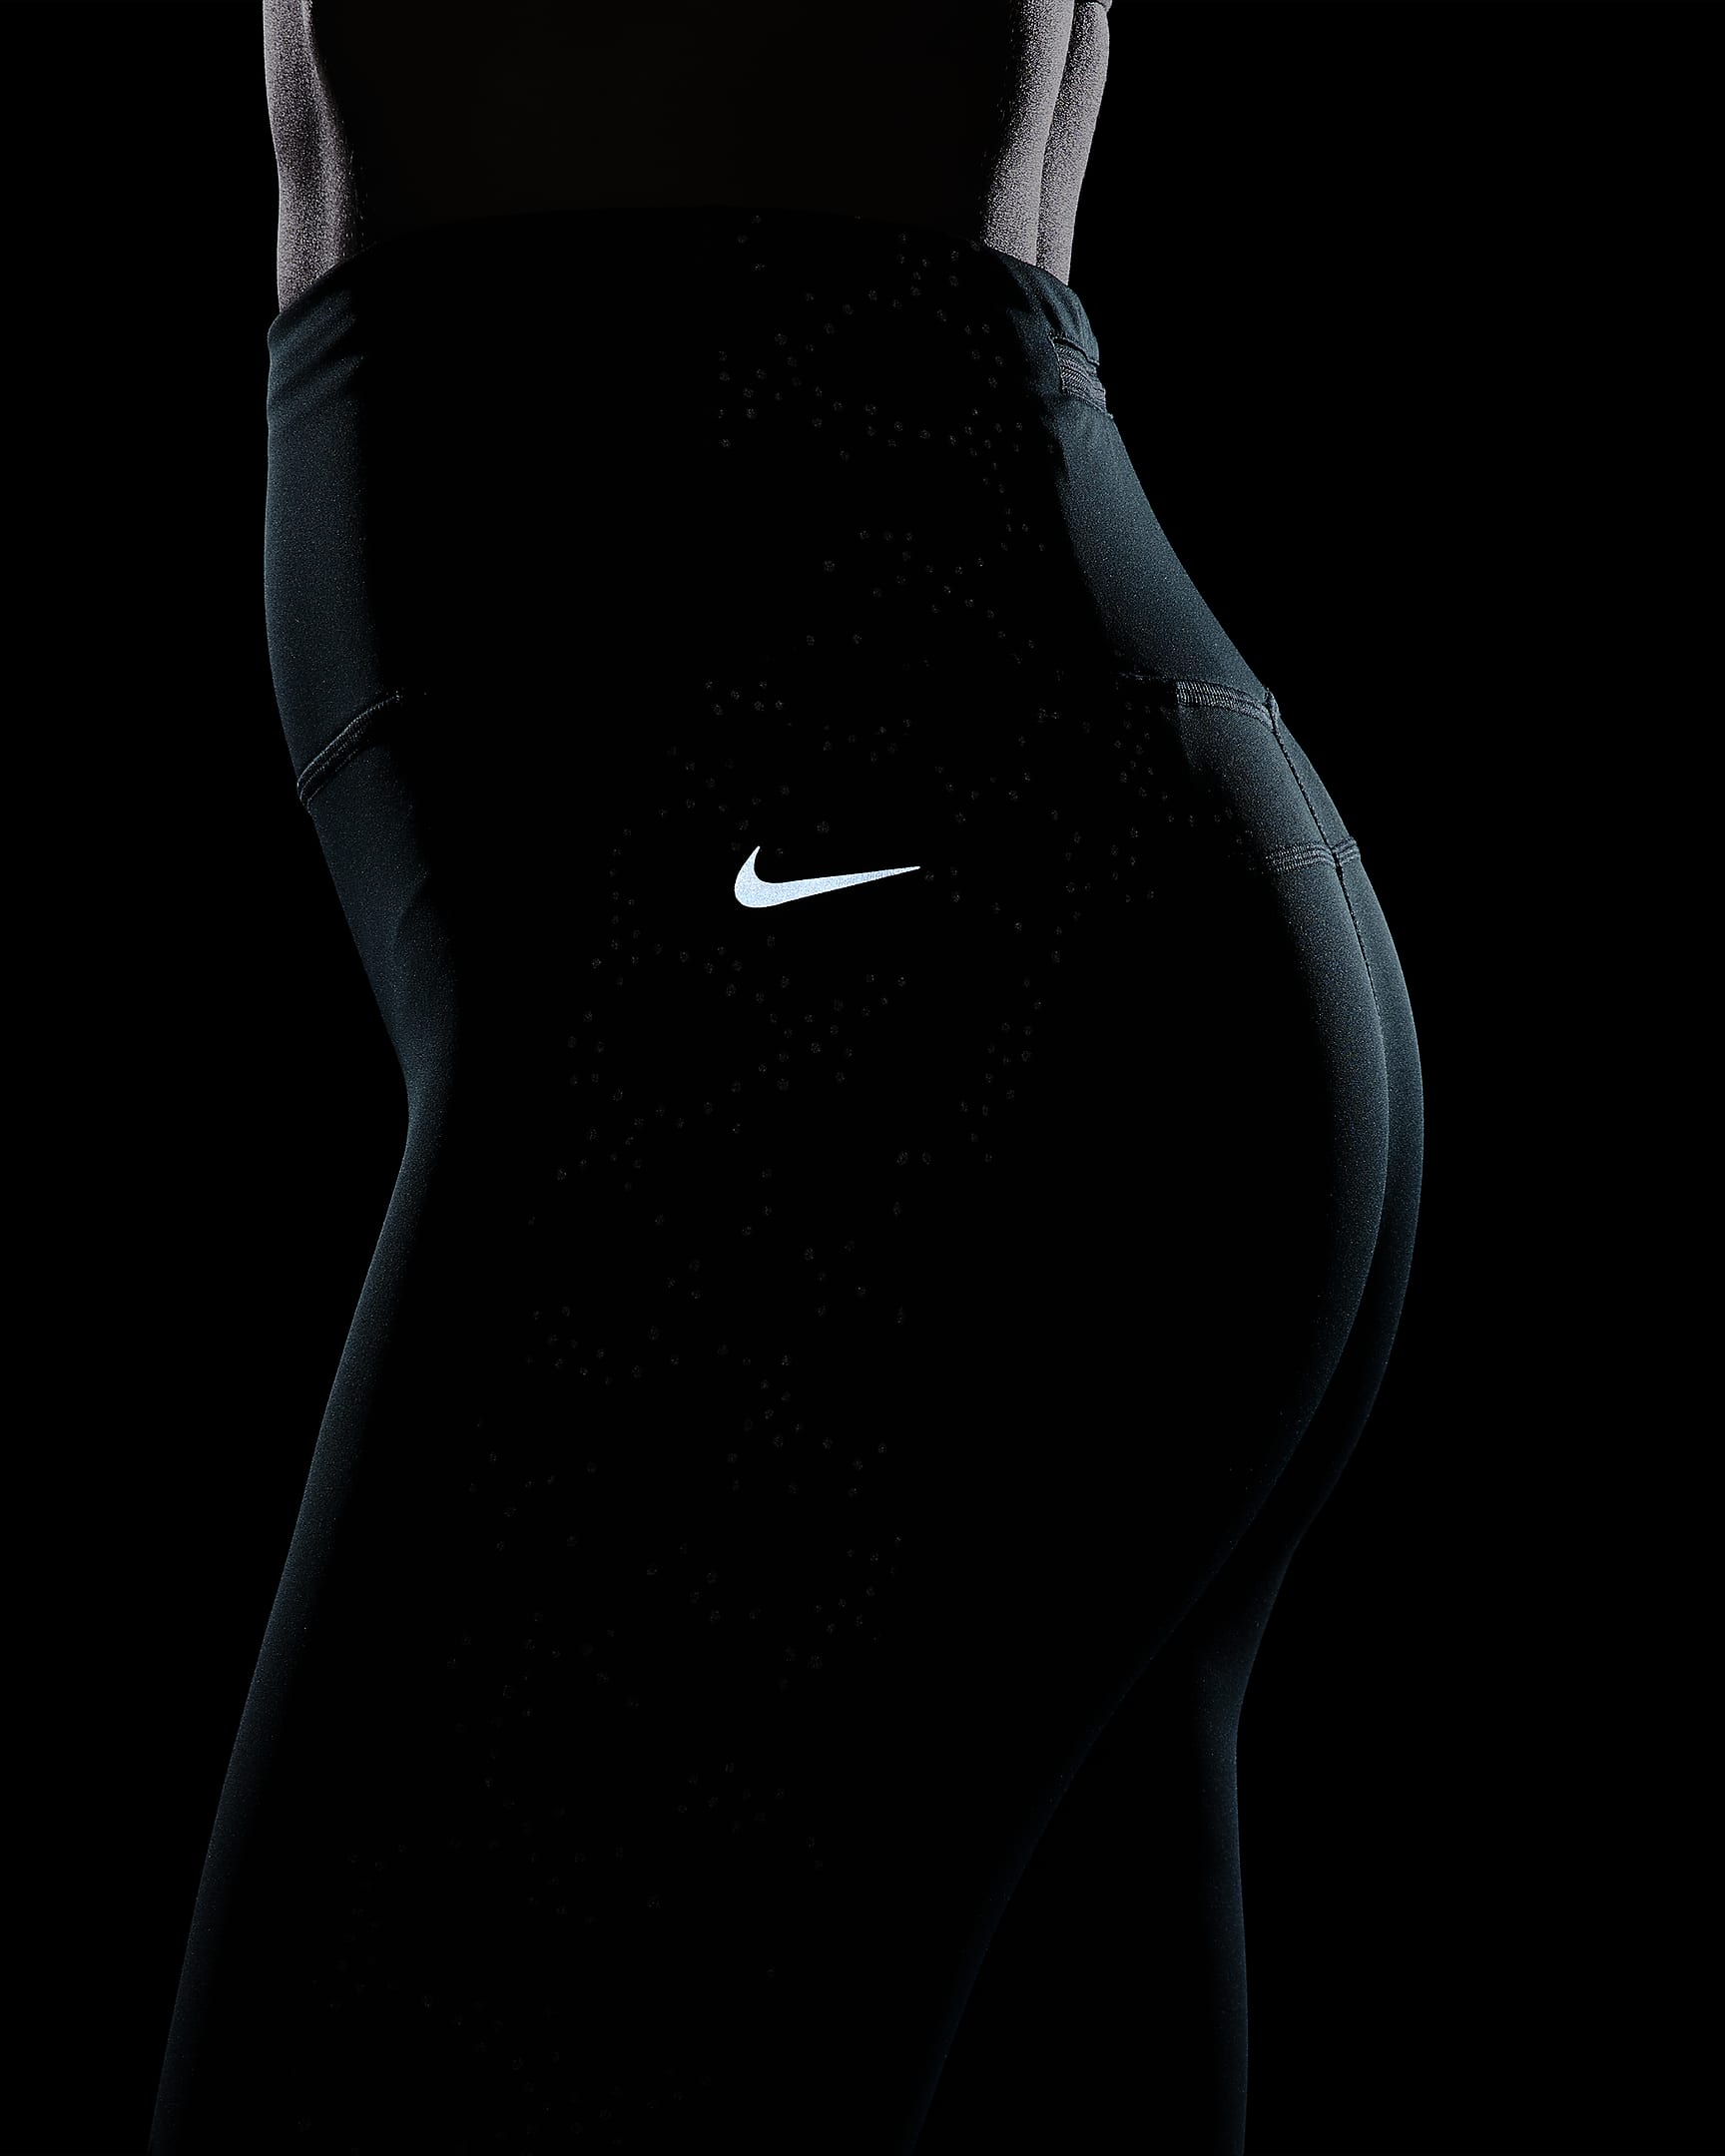 Nike Fast Women's Mid-Rise 7/8 Printed Leggings with Pockets. Nike UK